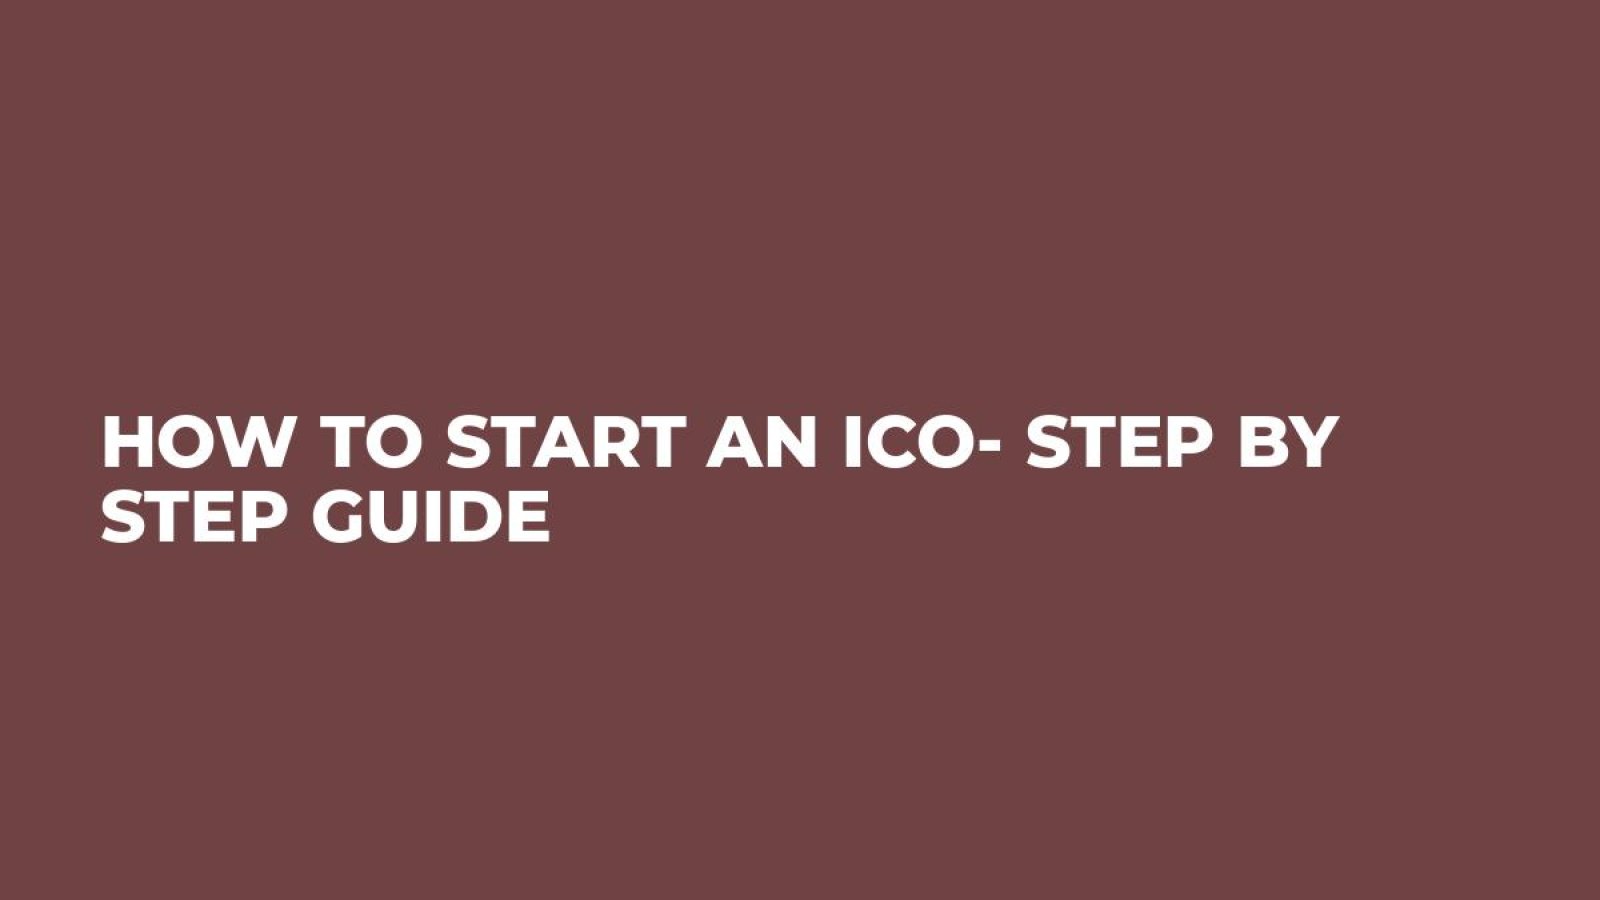 How to Start an ICO- Step by Step Guide